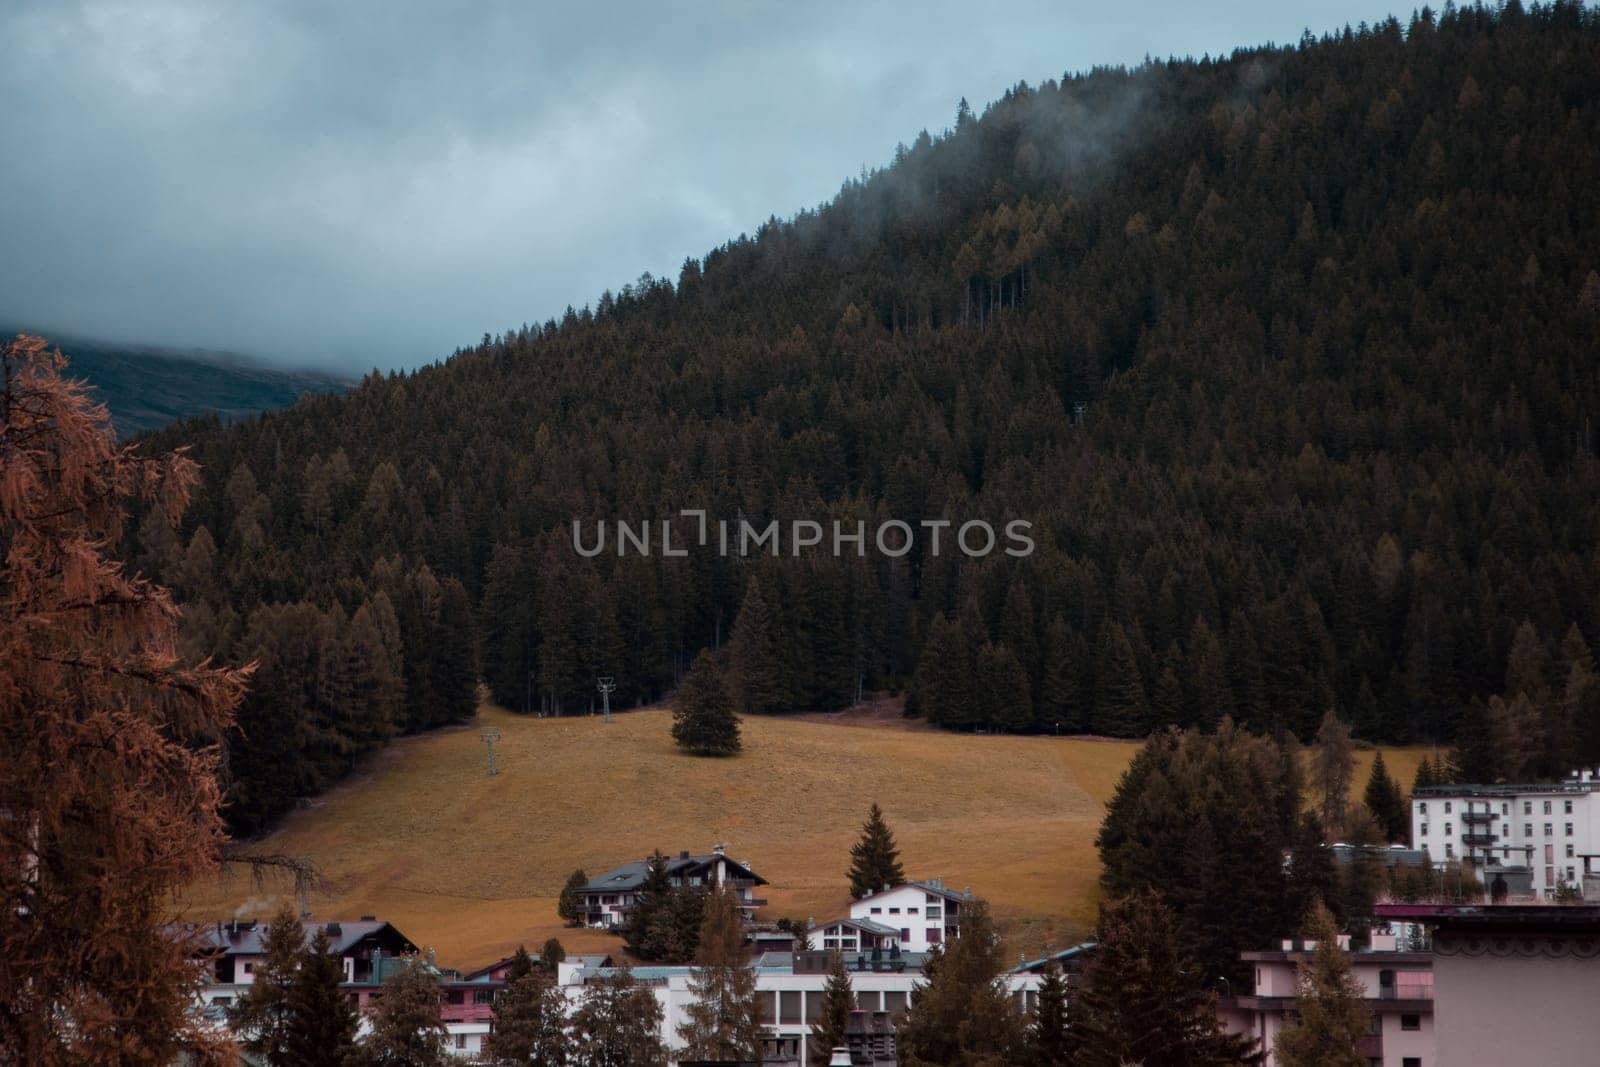 Alpine Village Awaits Winter's Cloak Beneath a Canopy of Autumnal Pines by NadyaBeson